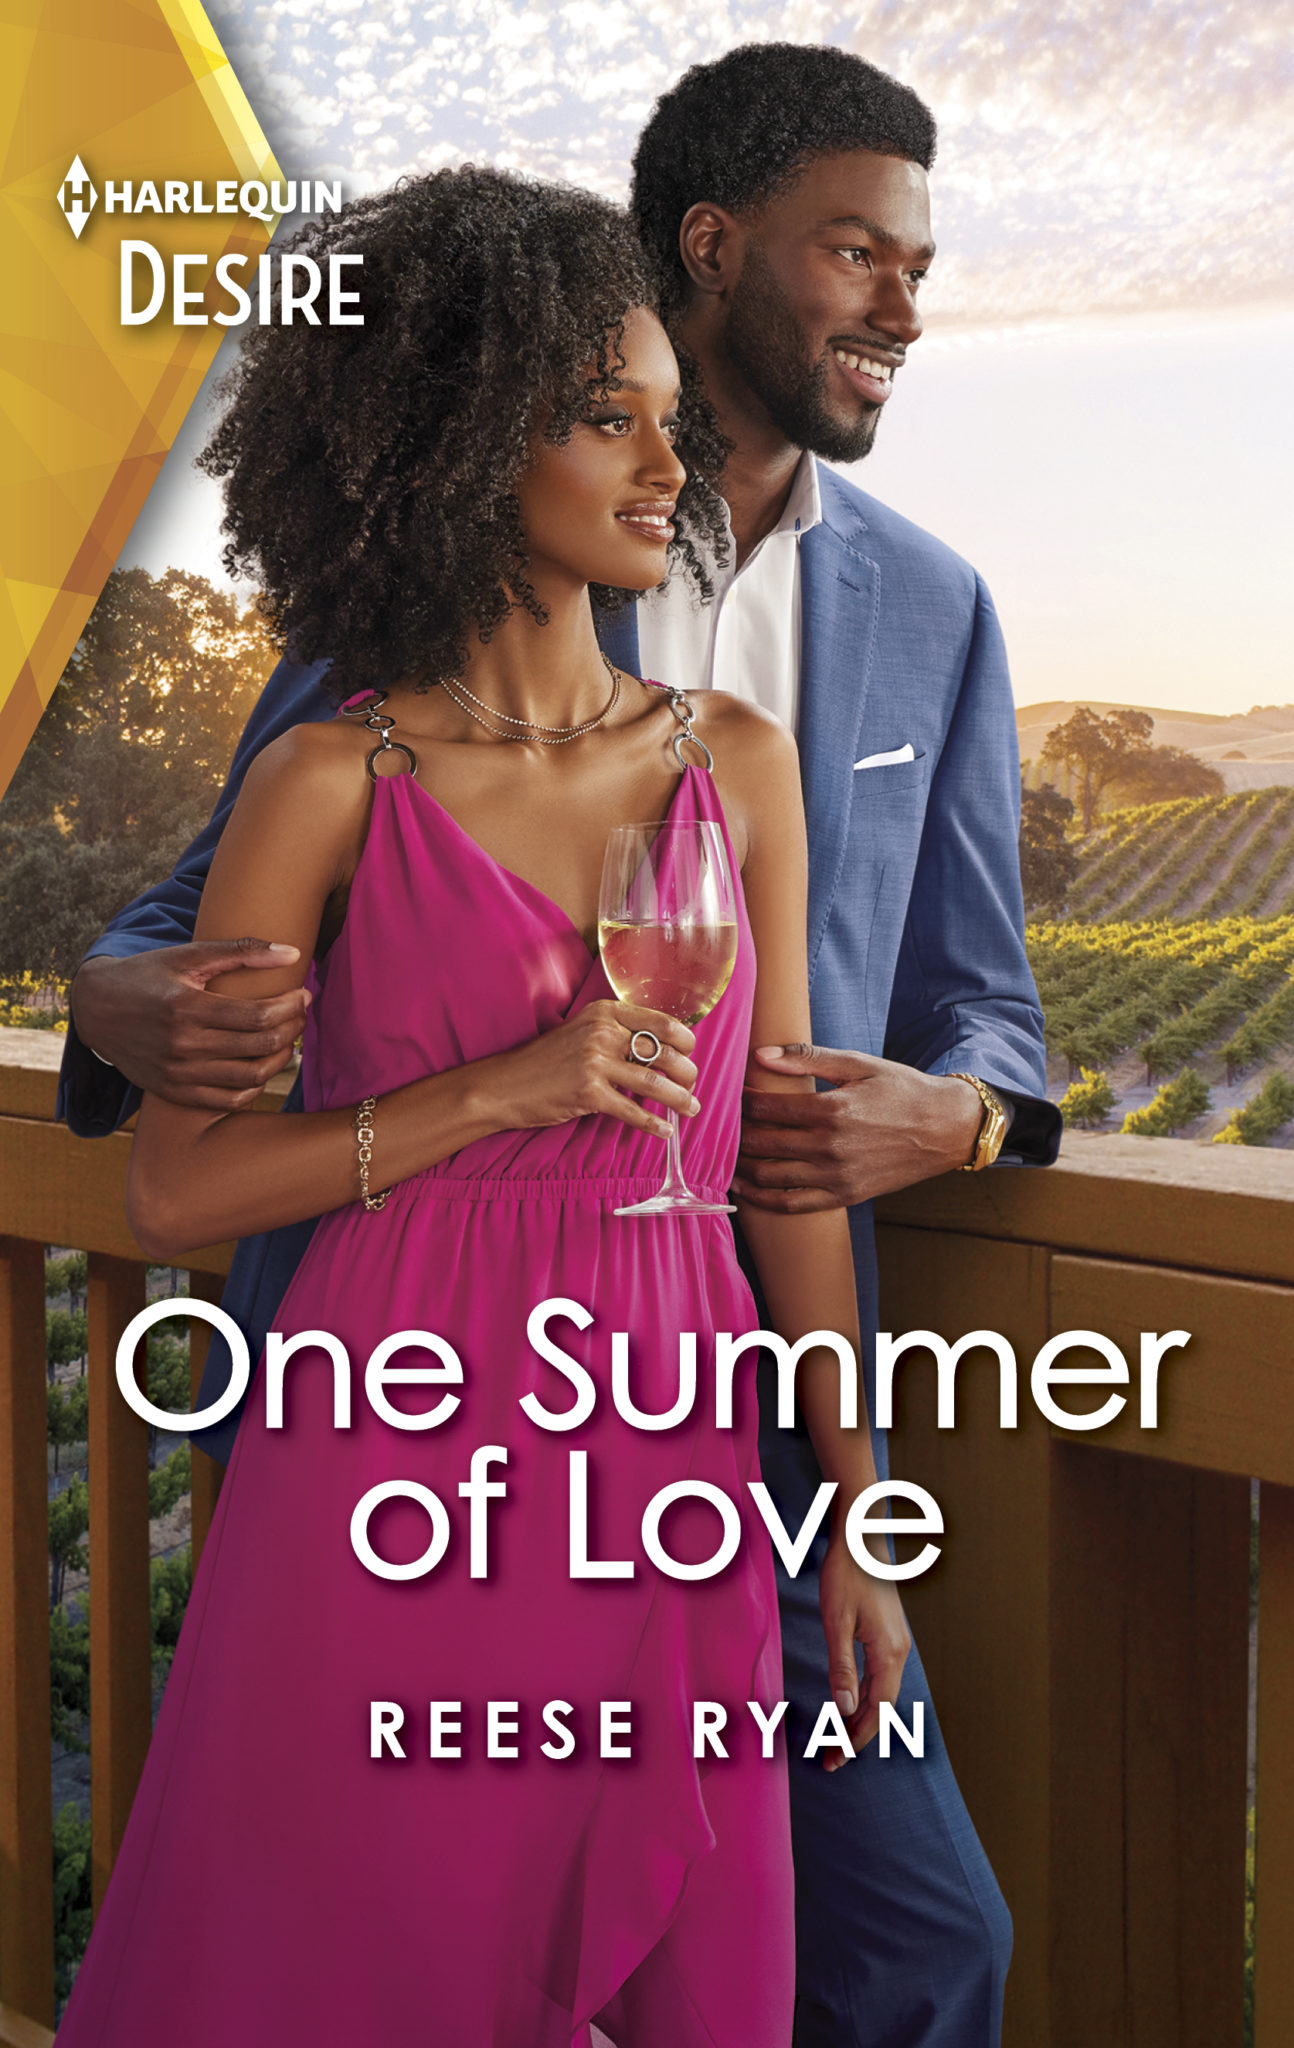 ONE SUMMER OF LOVE by Reese Ryan